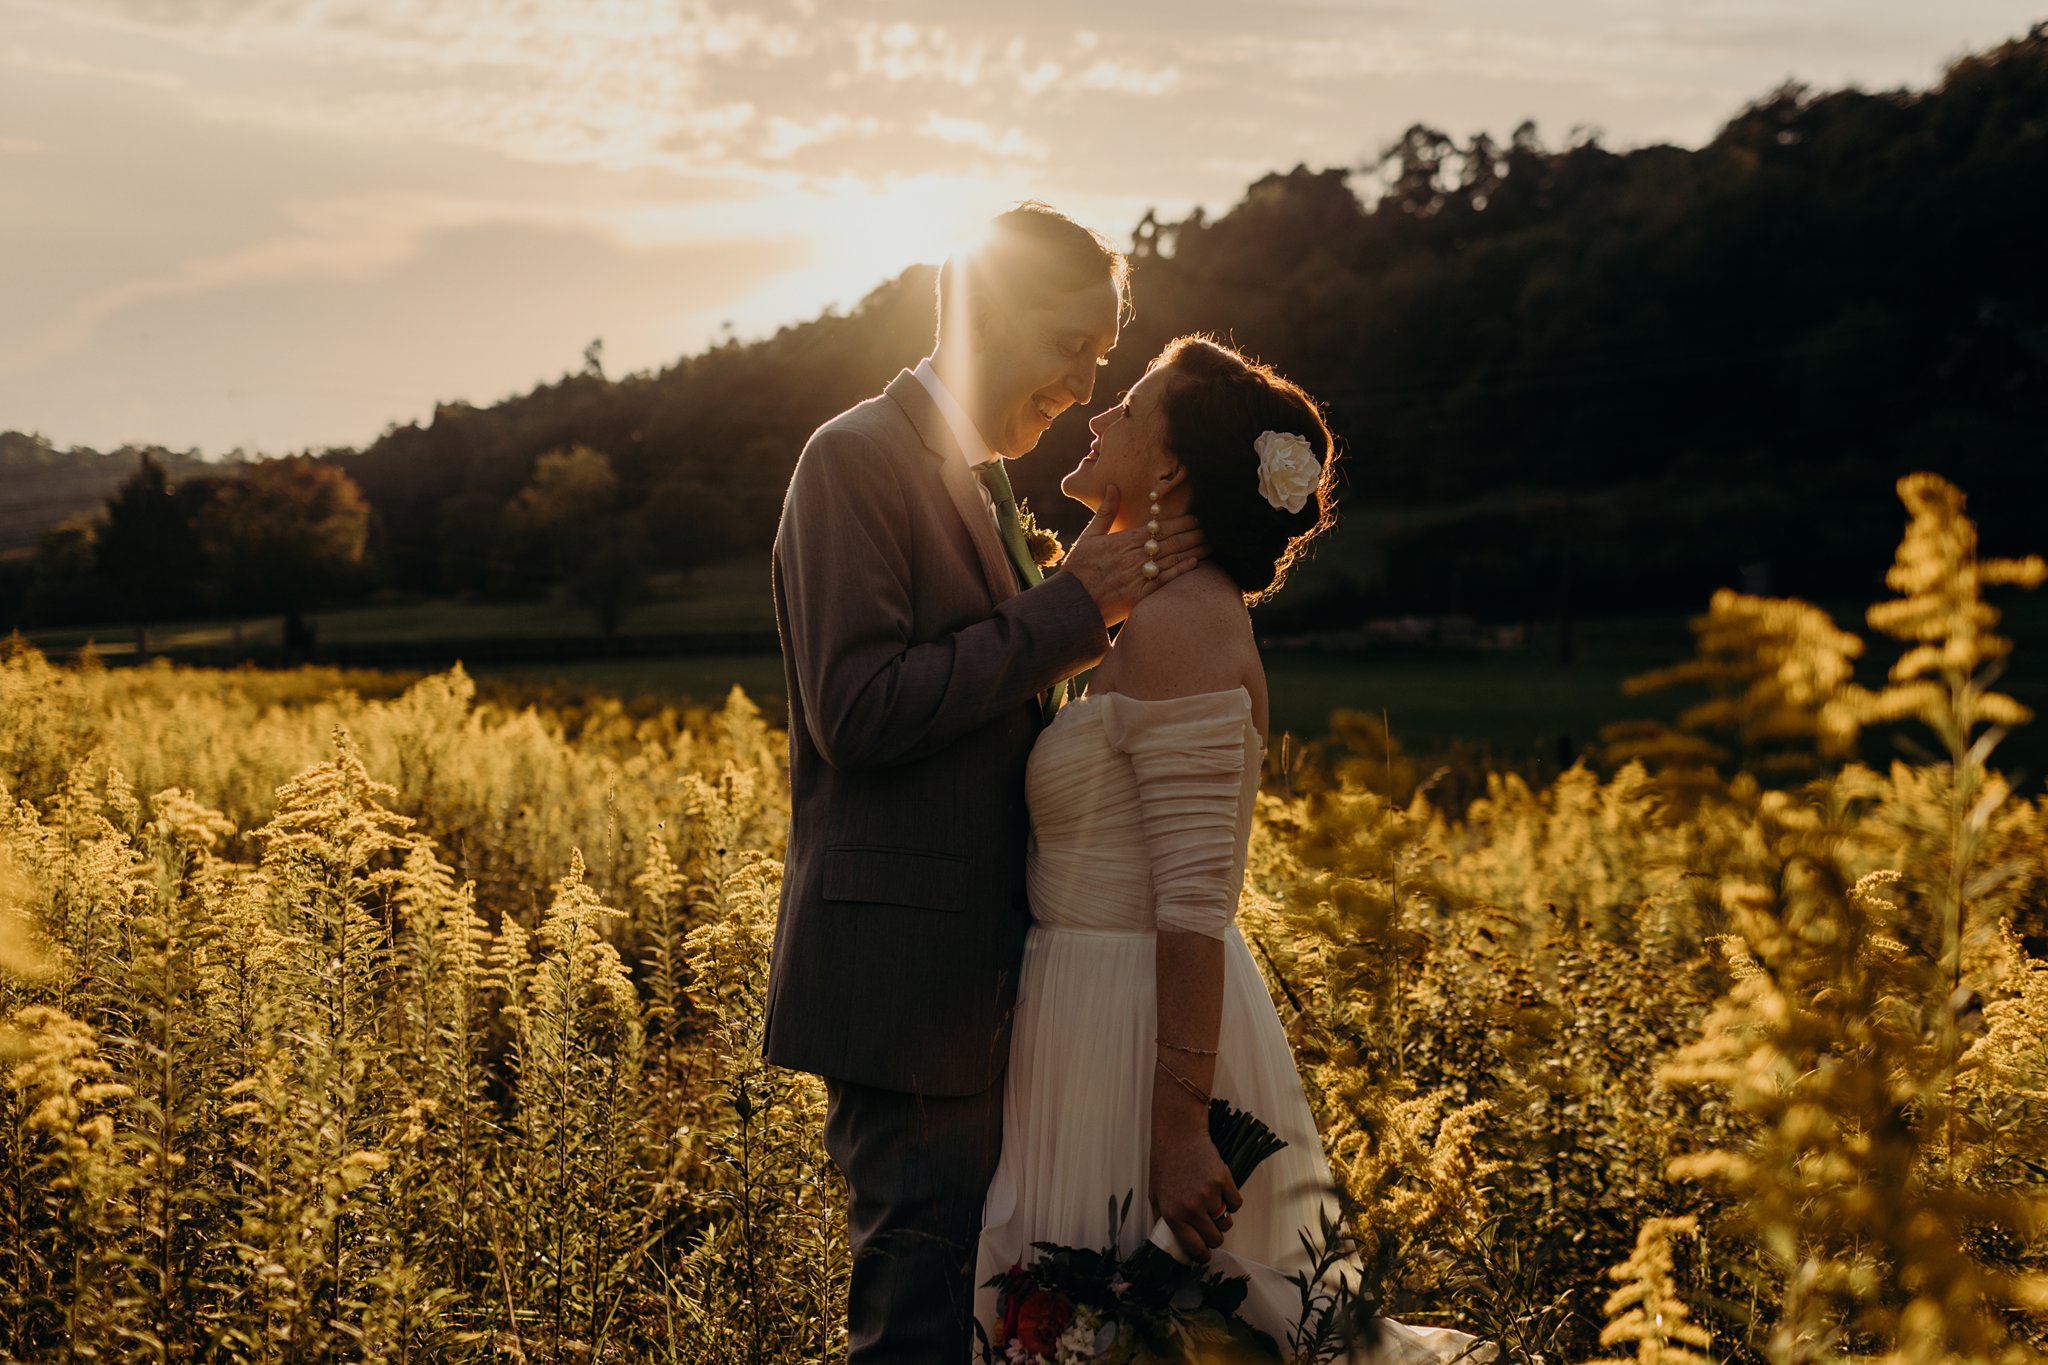 Deep Creek Lake Elopement and Intimate Wedding Guide with locations, vendors, and tips. 